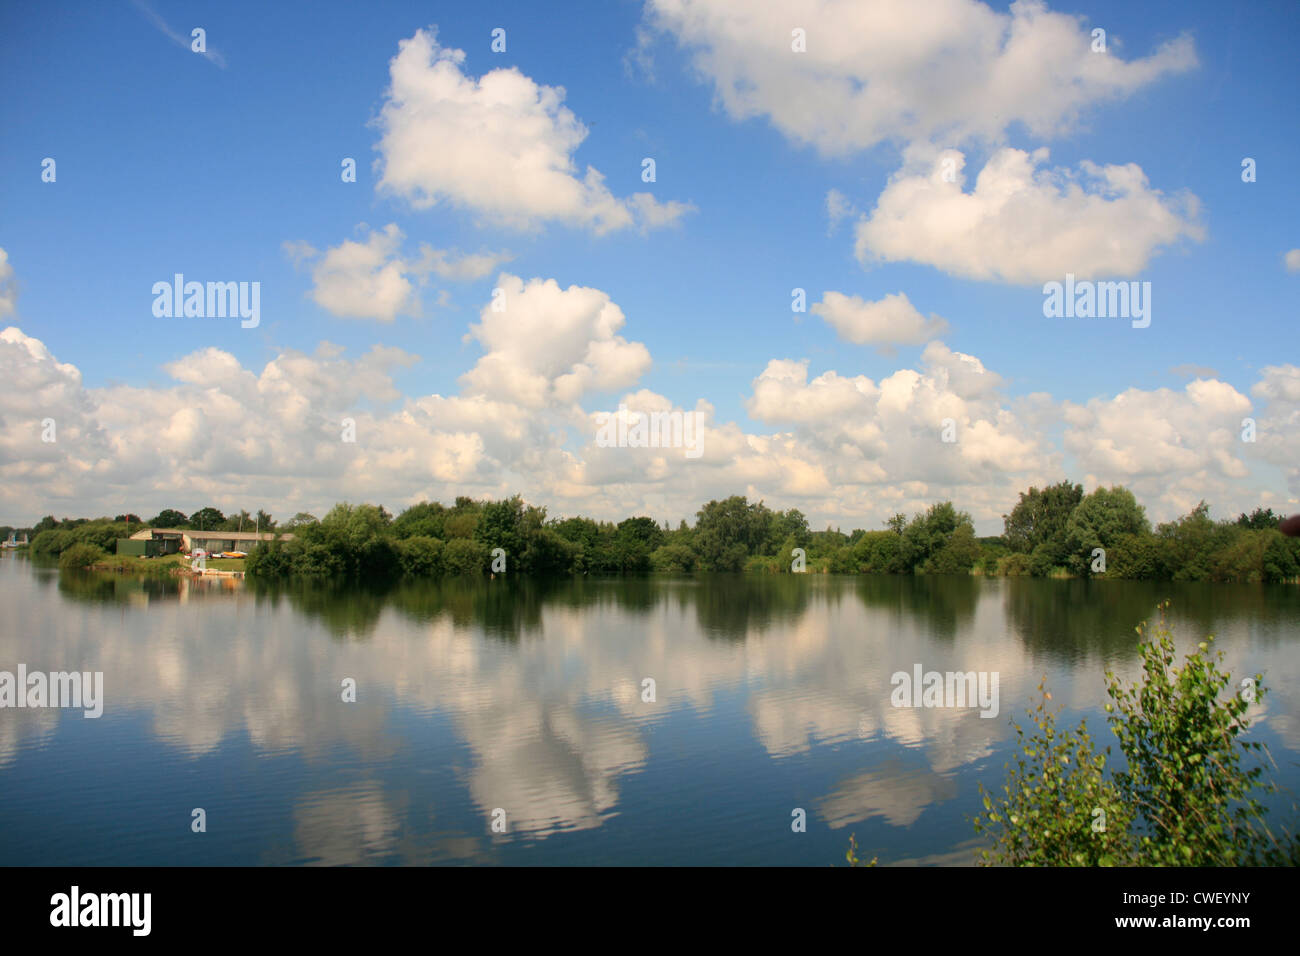 Cloud and tree reflections on a lake in North Hykeham, Lincoln in Lincolnshire, England Stock Photo